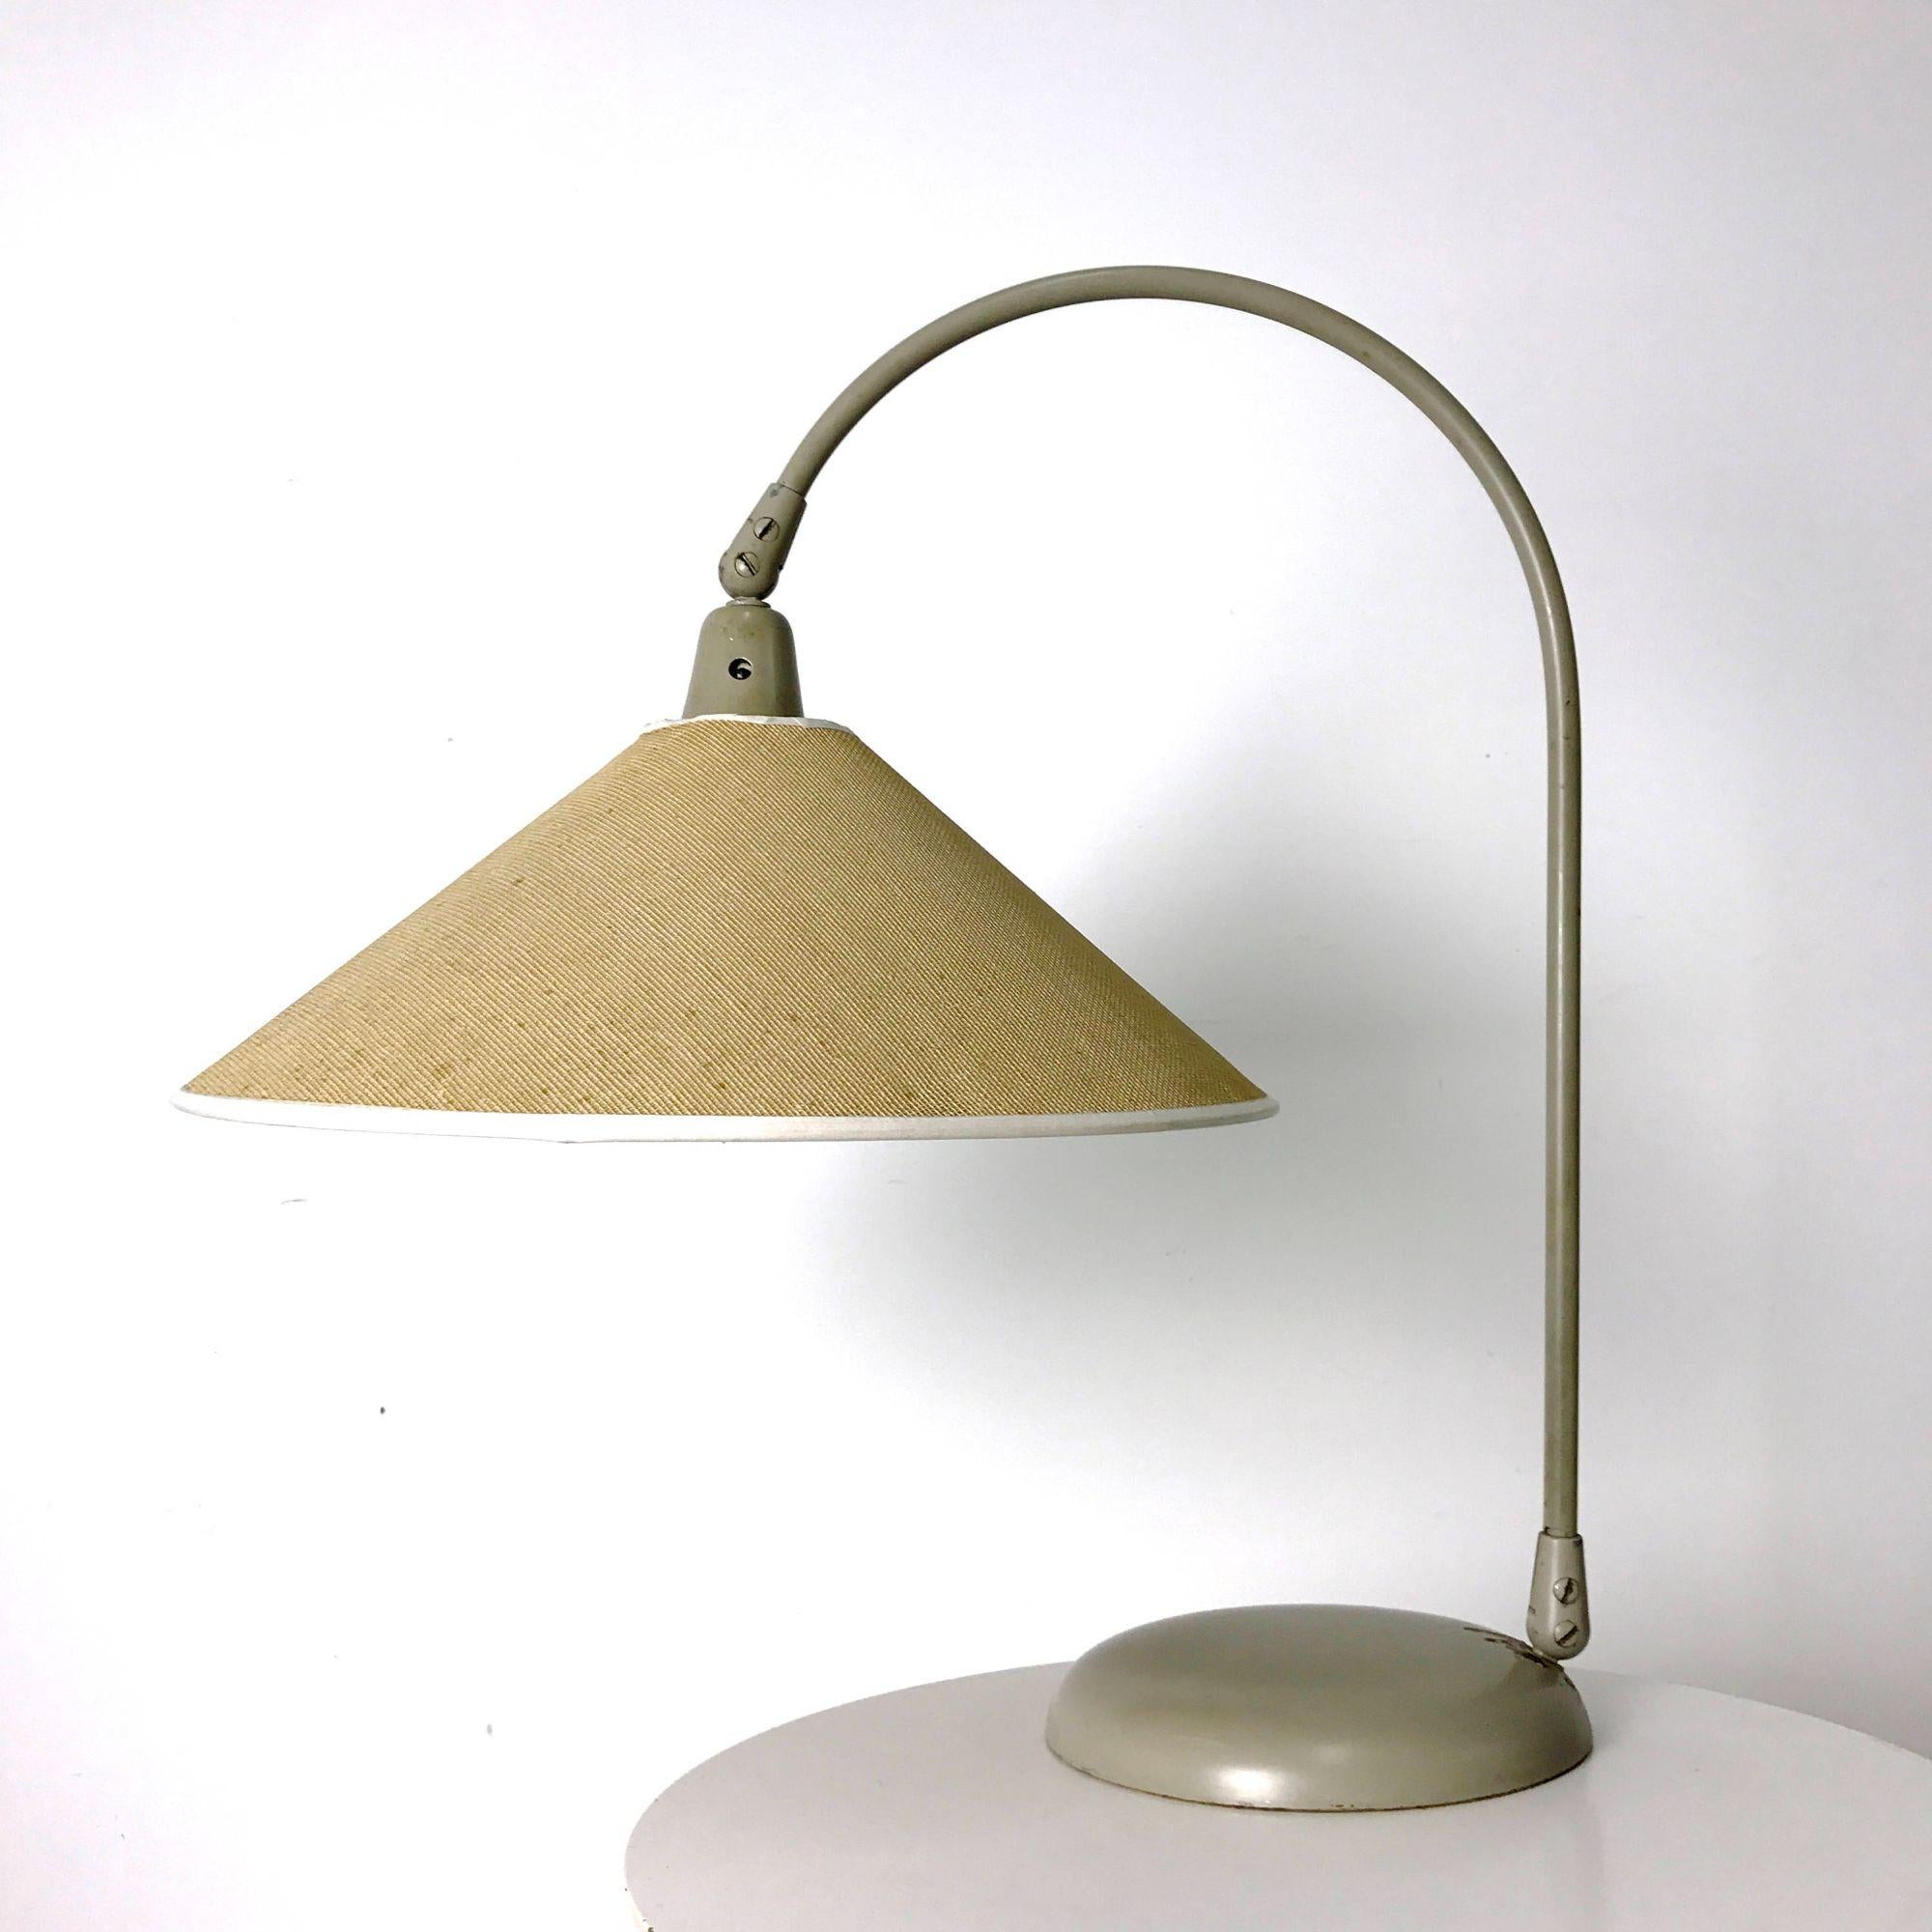 Rare Kurt Versen Articulated Table Lamp 1950's

Rare table lamp, model 4420, designed by Kurt Versen for Kurt Versen Lamps, Inc. early 1950's. Articulated shade and arced arm on enameled metal base, shade is original with new taping.
Signed with